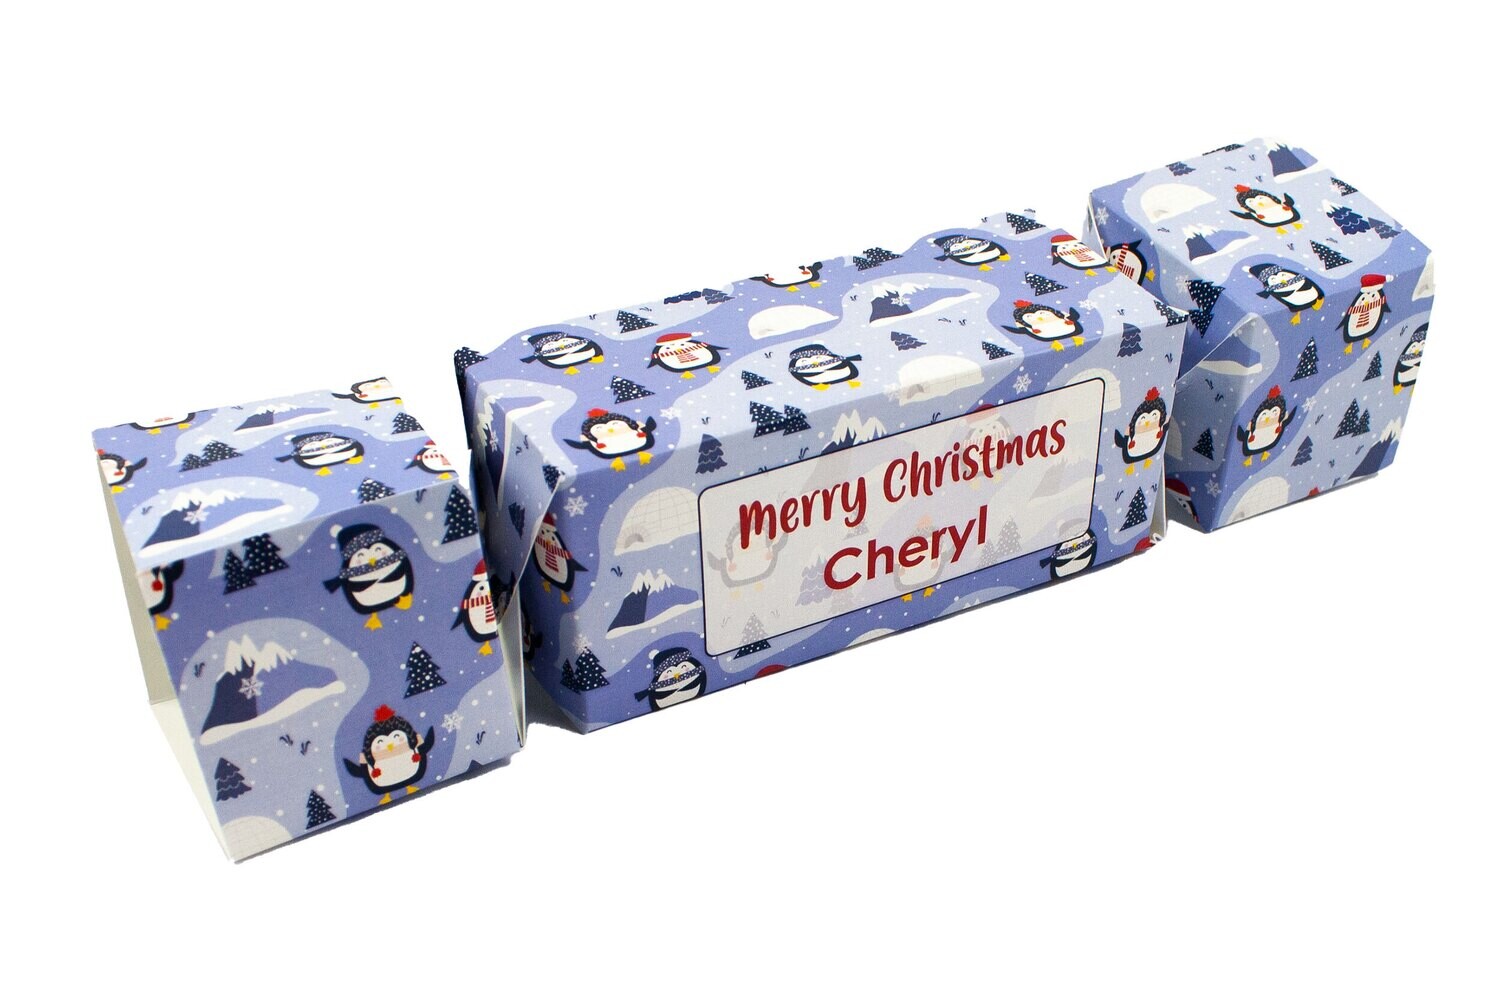 Christmas Money Wallet In the Shape Of A Cracker Shaped Box - Penguin Design